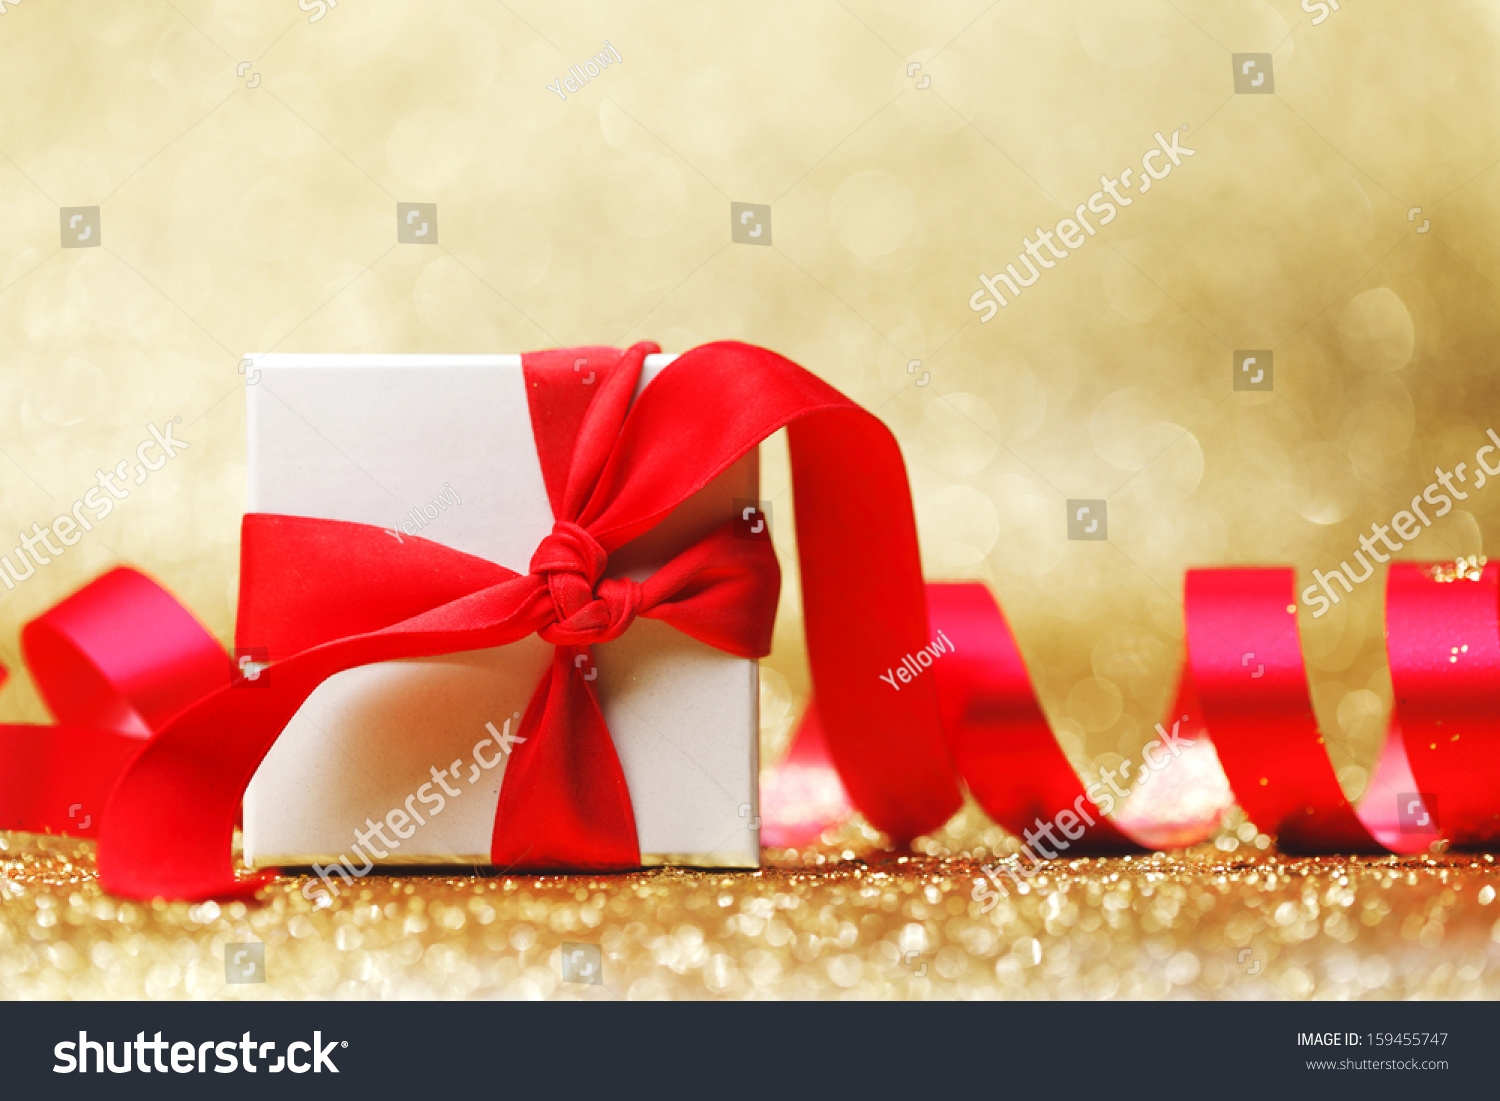 Christmas gift in white box with red ribbon decoration on golden background #159455747